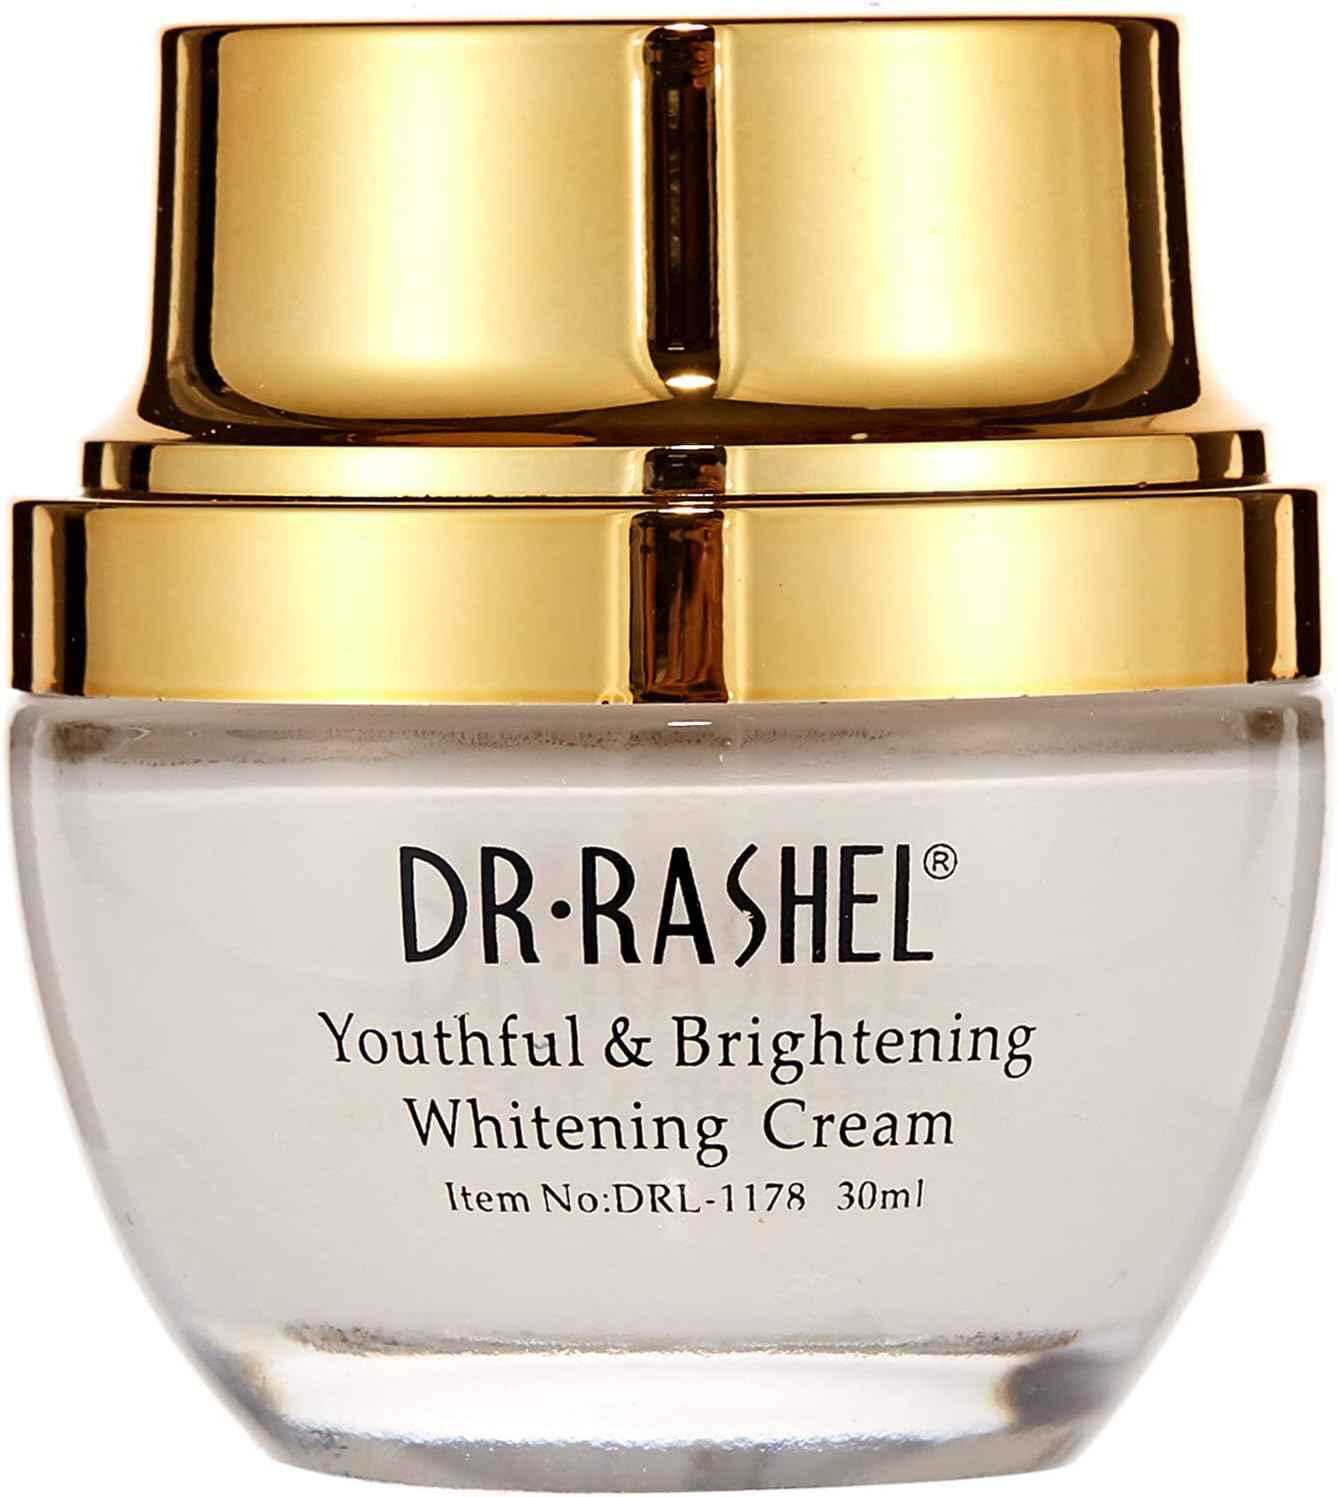 Close-up photo of a pink jar with gold accents and Dr. Rashel logo, displaying "25K Gold Collagen Whitening Cream 30ml." Luxurious cream texture with a subtle golden sheen.